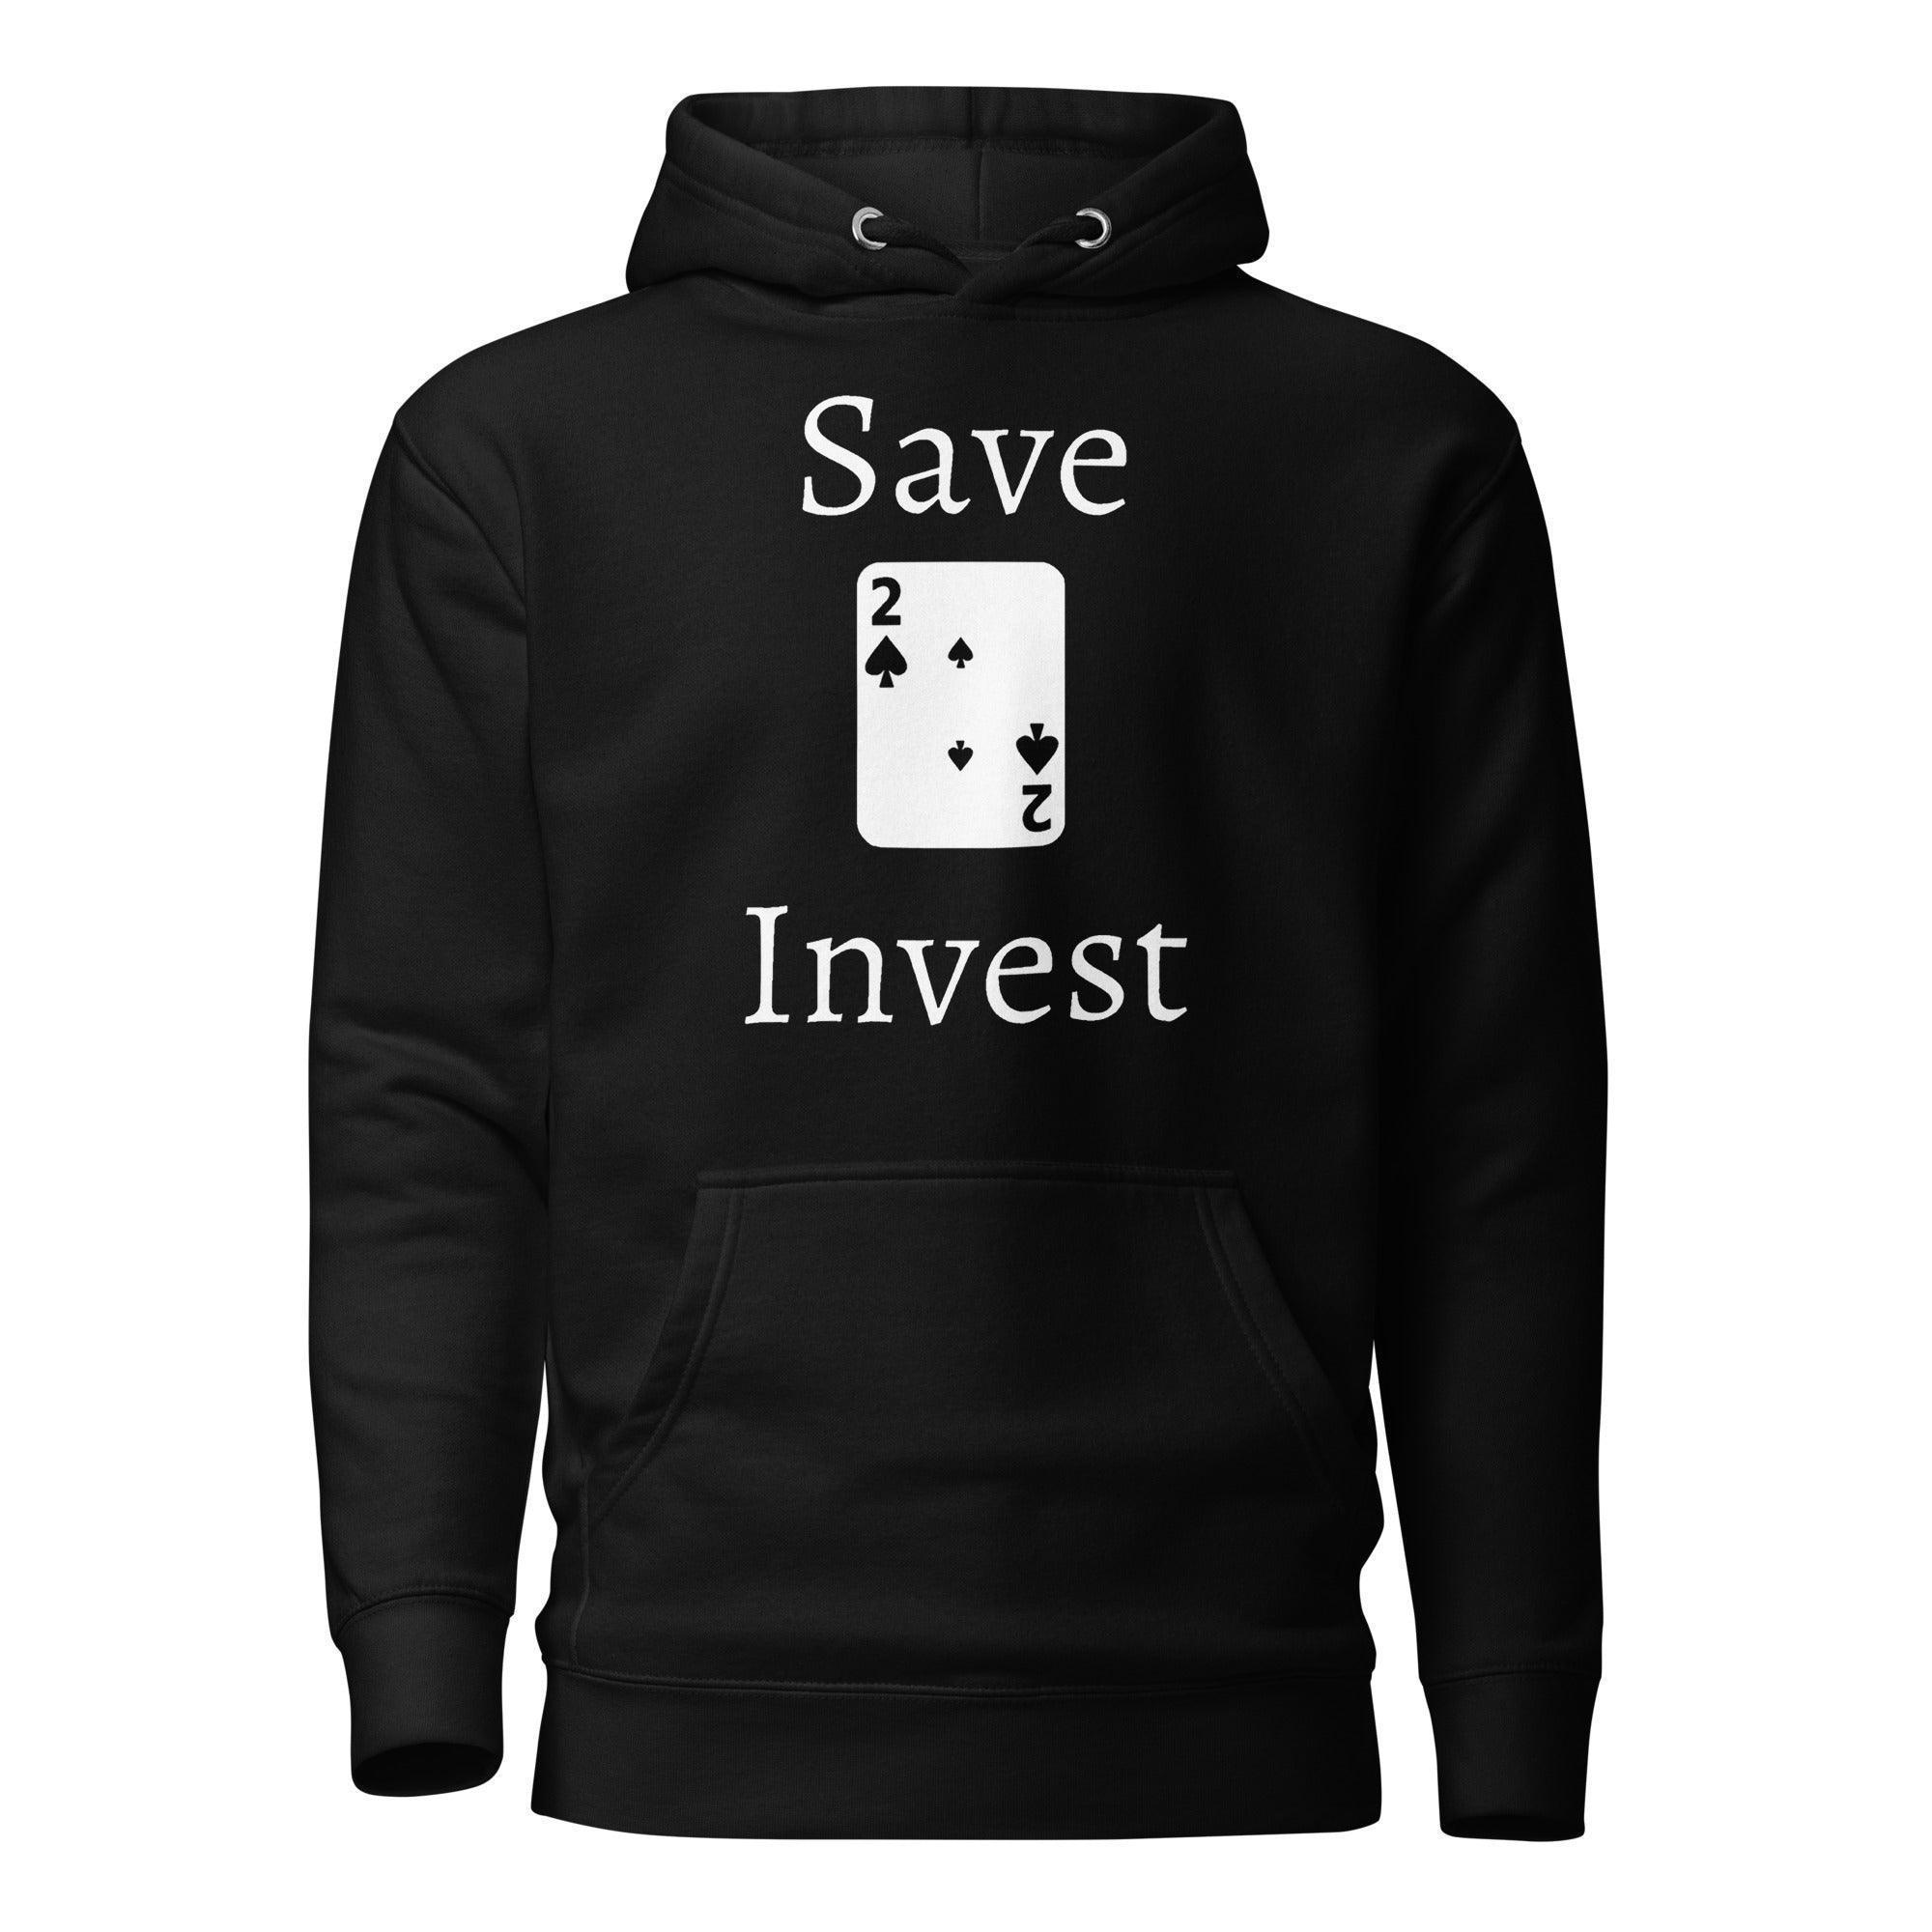 Save 2 Invest Pullover Hoodie - InvestmenTees